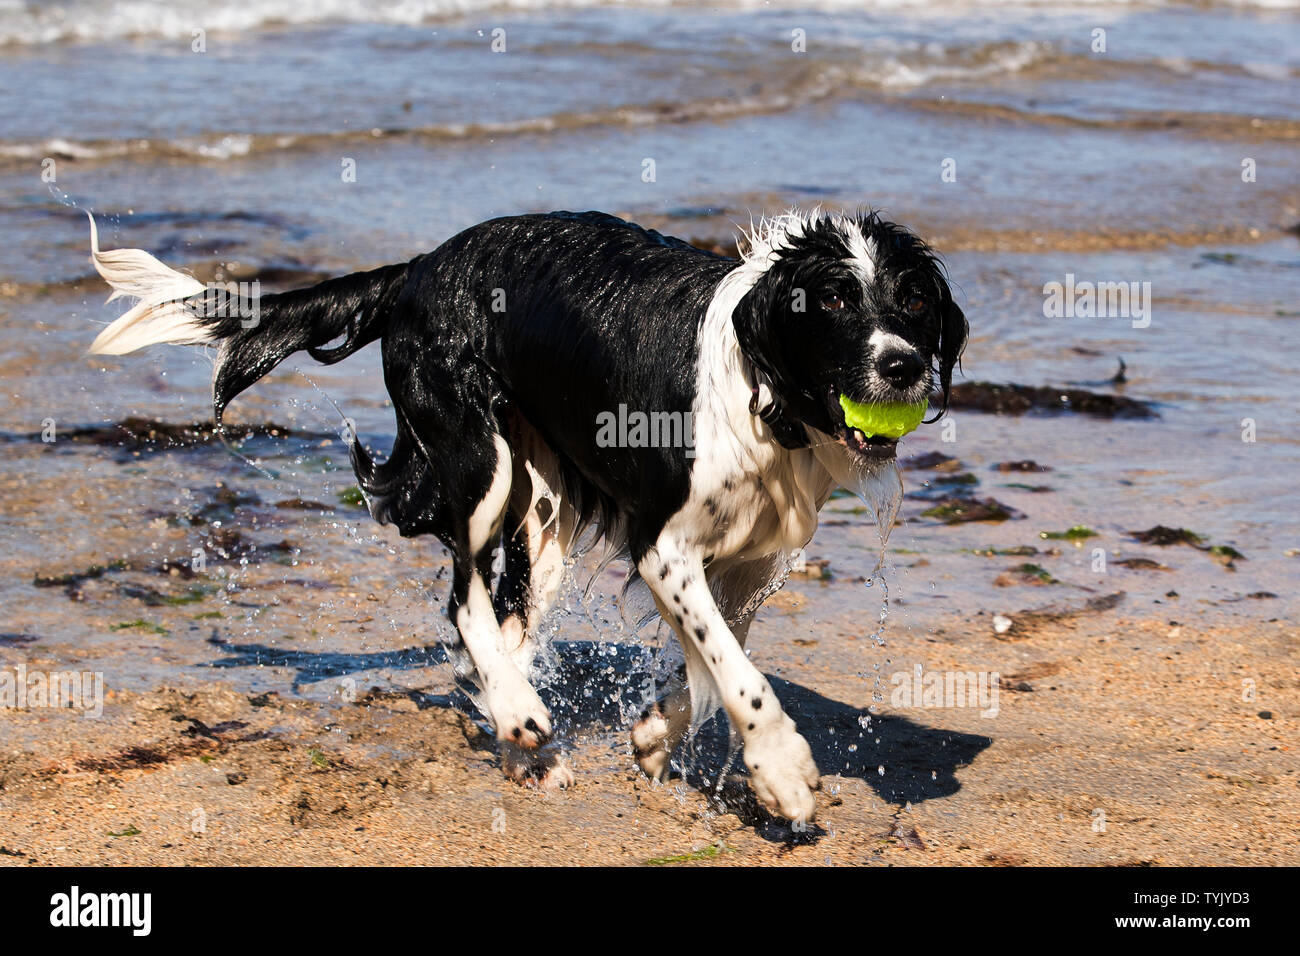 Chupa the Border Collie and Spaniel cross breed runs with a tennis after coming out of the water at Helens Bay beach in Northern Ireland. Stock Photo